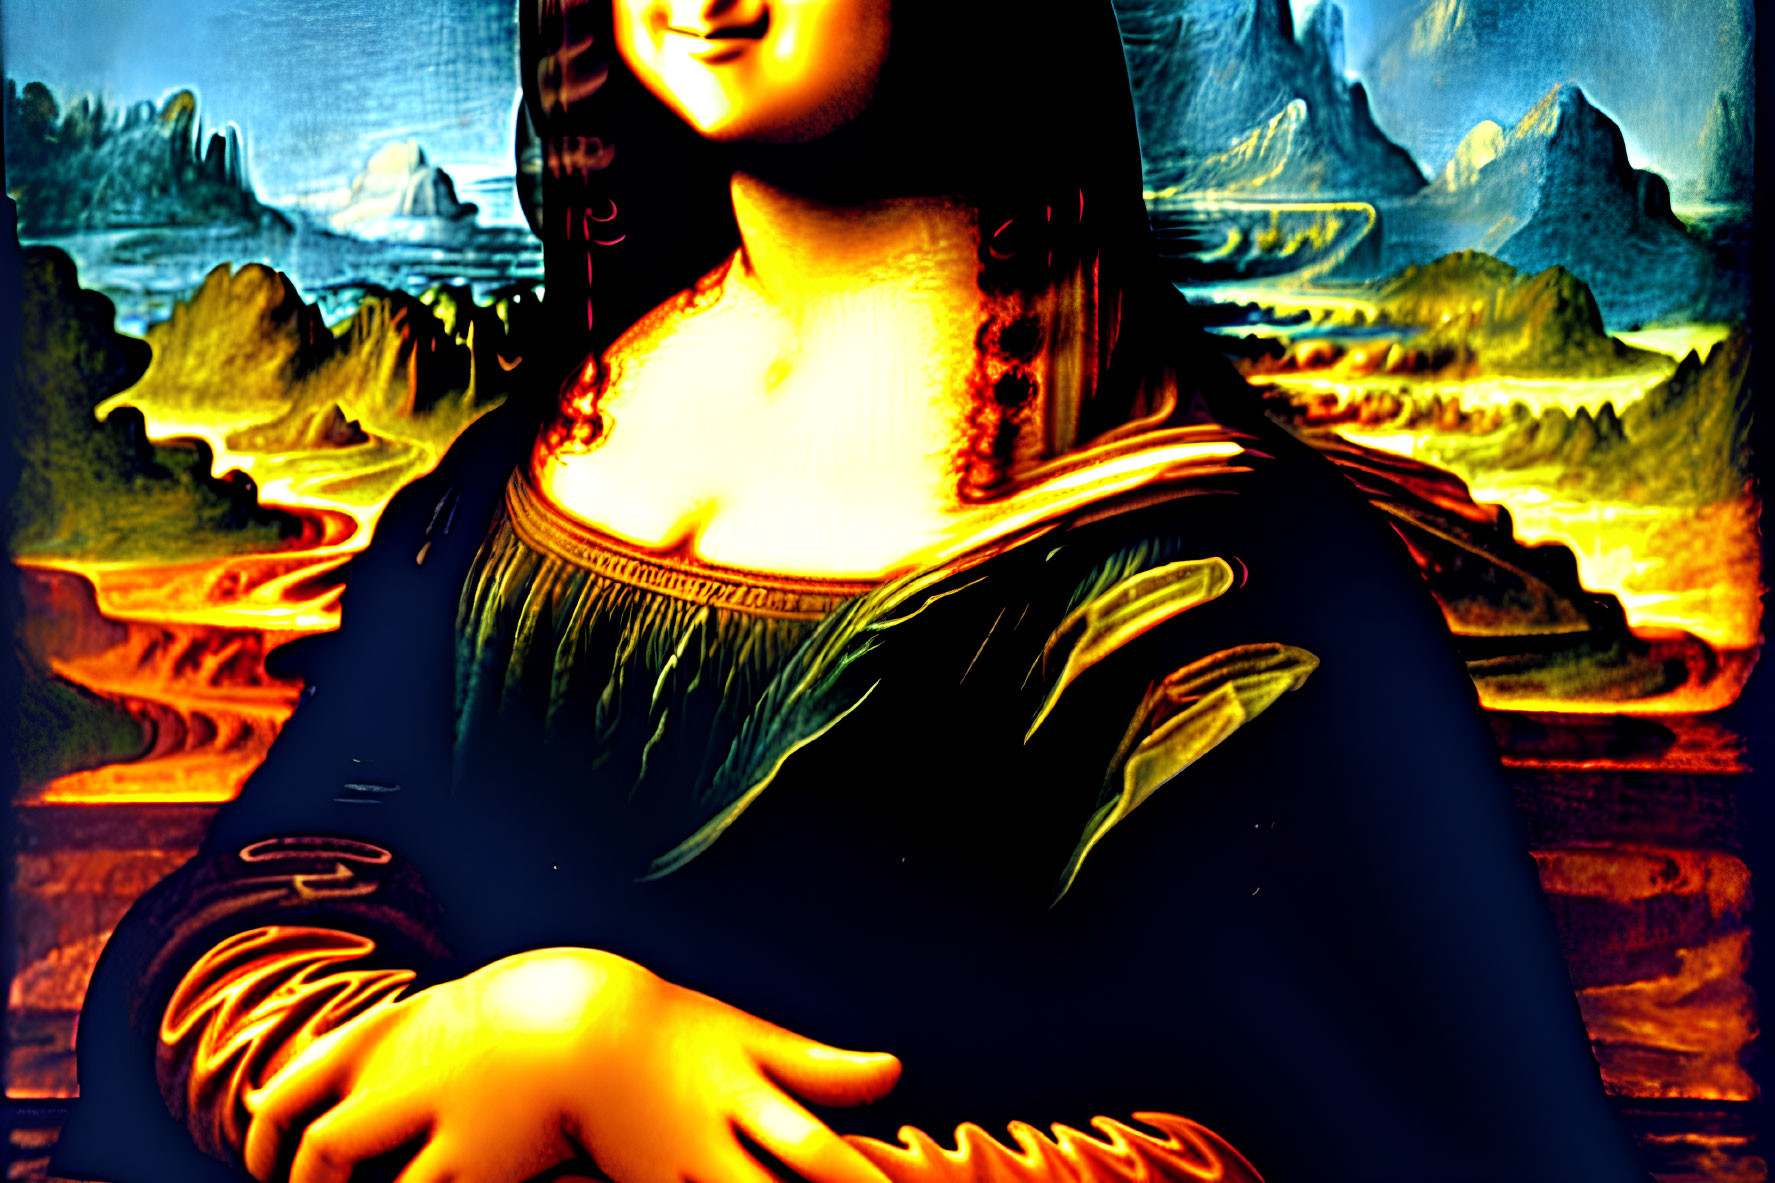 Vividly Colored Mona Lisa Painting with Golden Hues